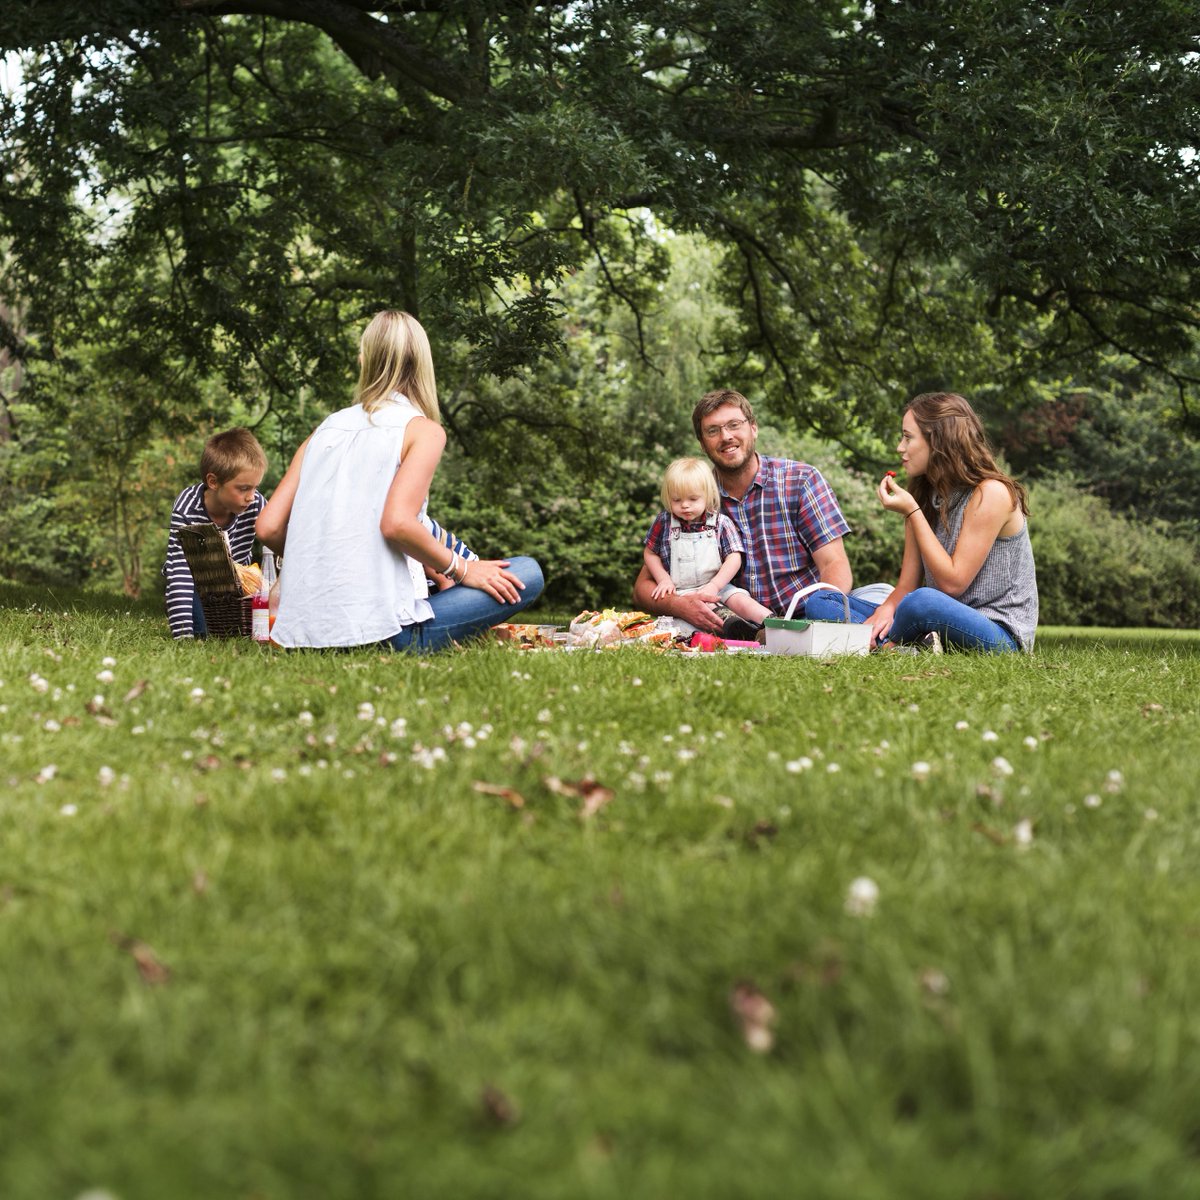 It's #NationalPicnicWeek
Where is your favourite place to picnic and what would you be eating? 

#picnic #summer #familytime #perfectpicnic #gardenpicnic #parkpicnic #beachpicnic #indoorpicnic #picnichamper #picnicrug #uksummer #sausagerolls #scotcheggs